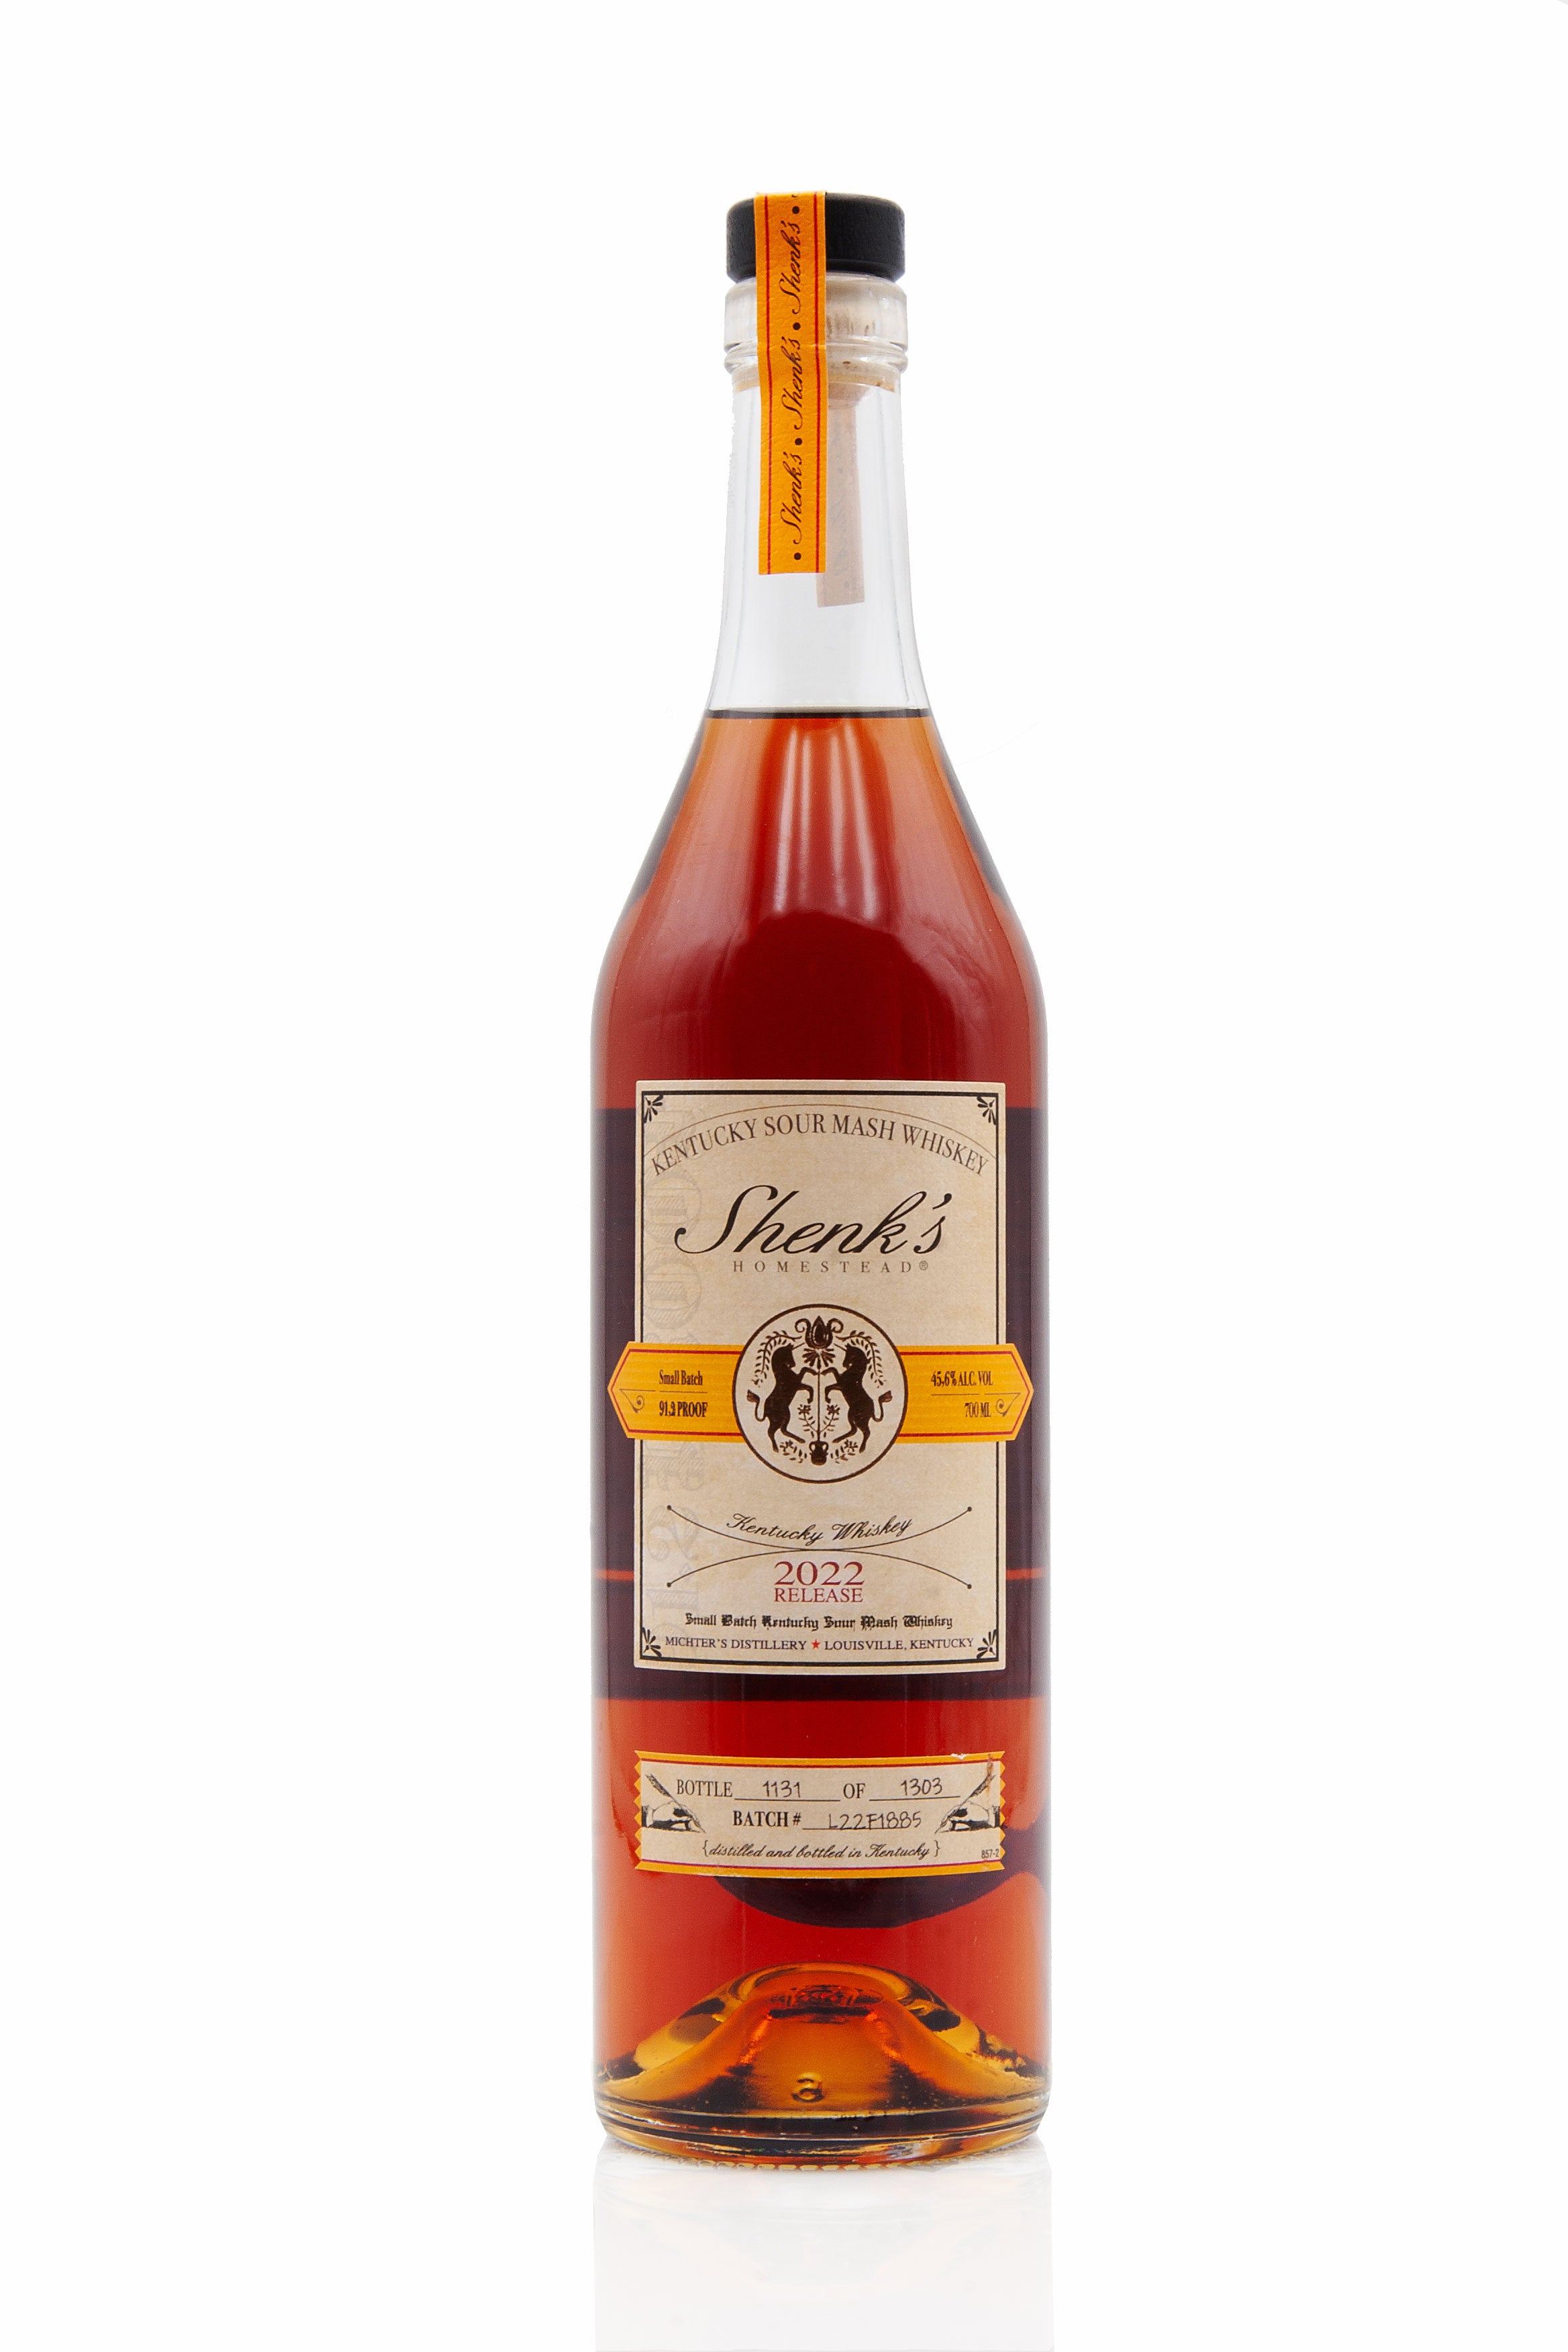 Shenk's Homestead 2022 Release | Abbey Whisky Online